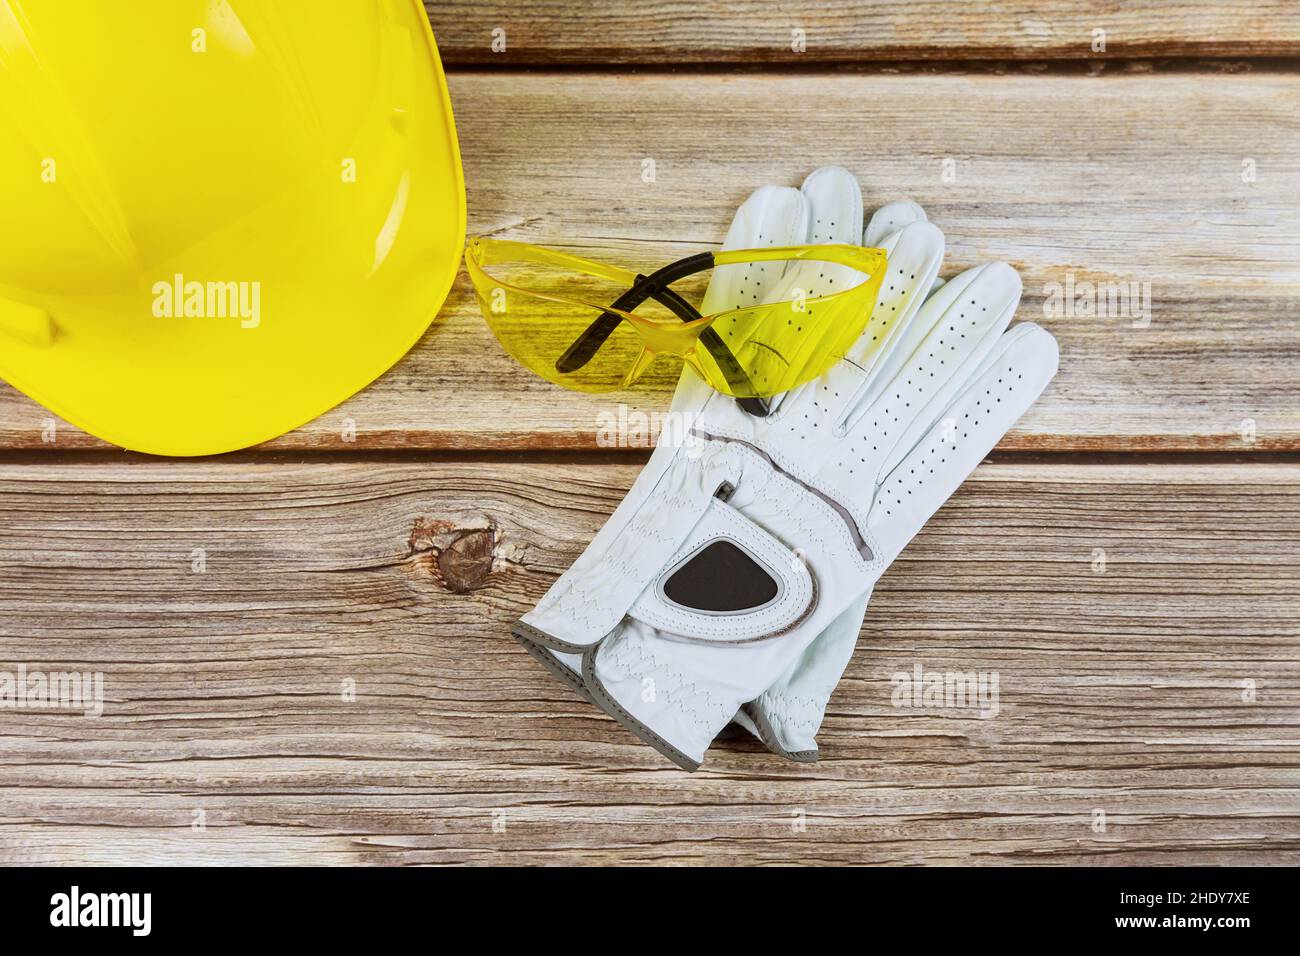 occupational safety, protective clothing, occupational safeties Stock Photo